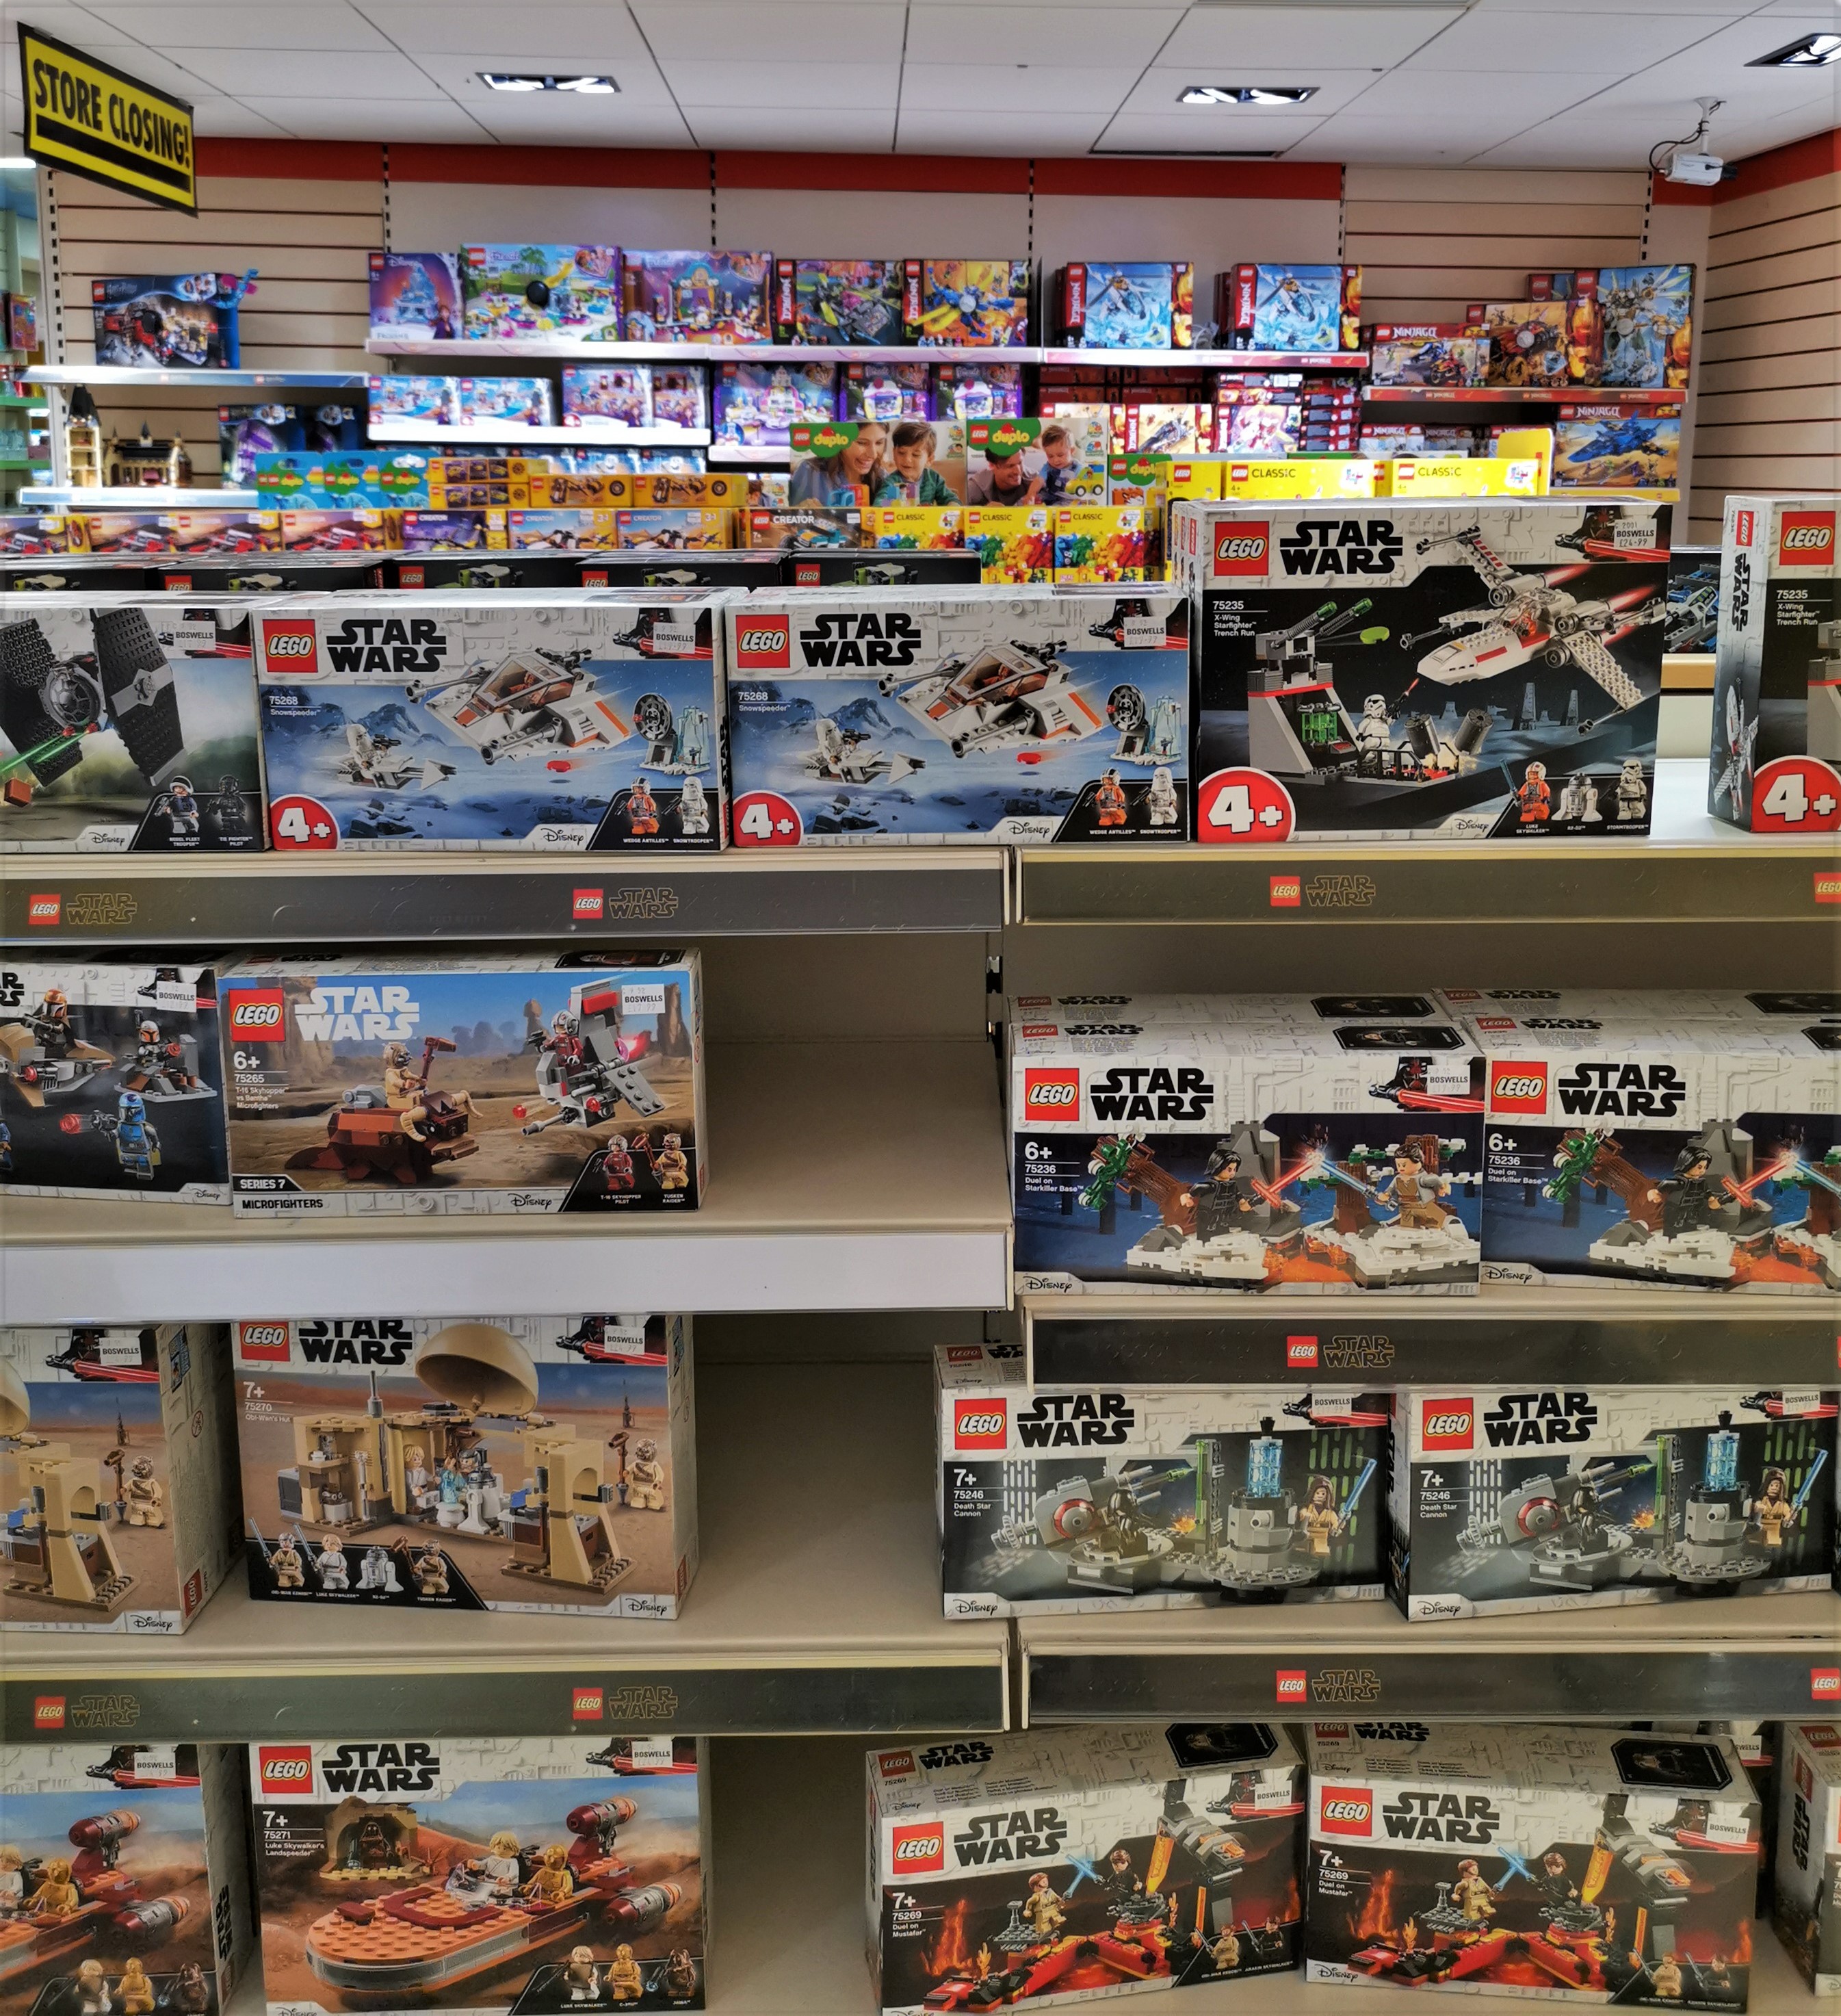 Mince Stramme Ansigt opad Boswells of Oxford on Twitter: "Duplo, Star Wars, Creator and much from LEGO  in our Toy department! 🧱 #Lego #Duplo #StarWars #Toys #HalfTerm  https://t.co/G68K2NHdC7" / Twitter